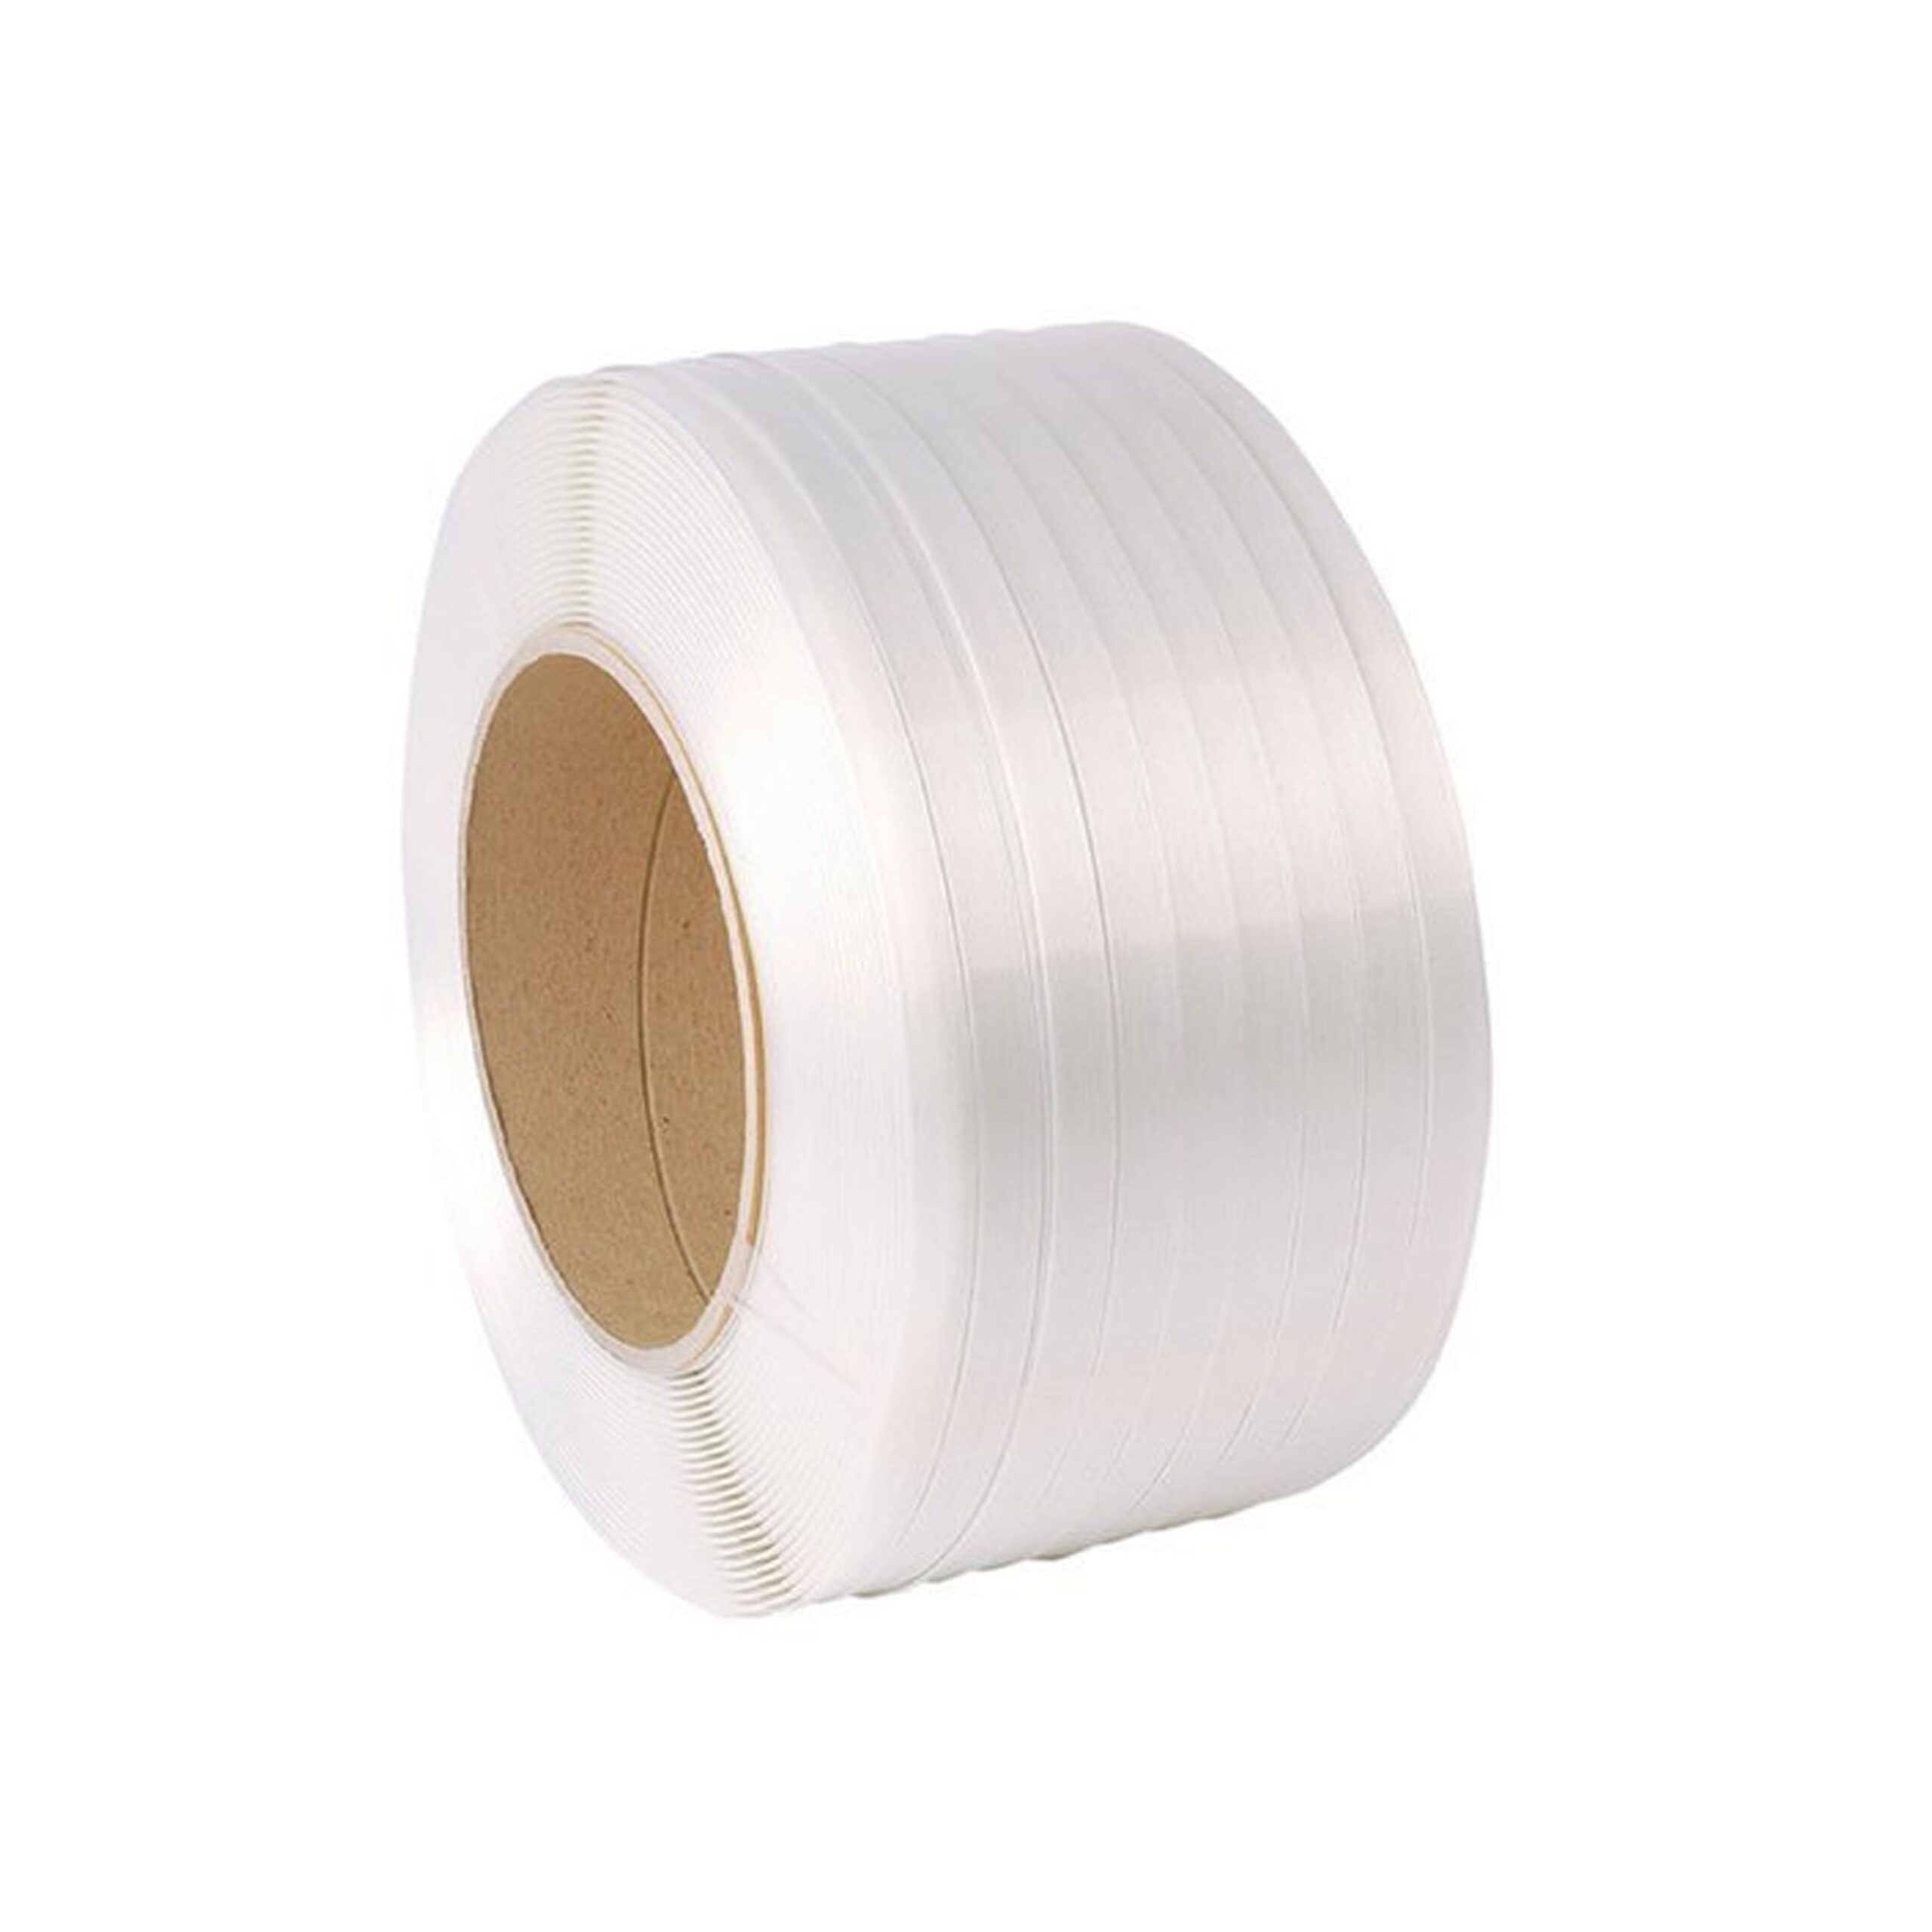 ROLL AUTO
STRAPPING WHITE
12mm x 2000m